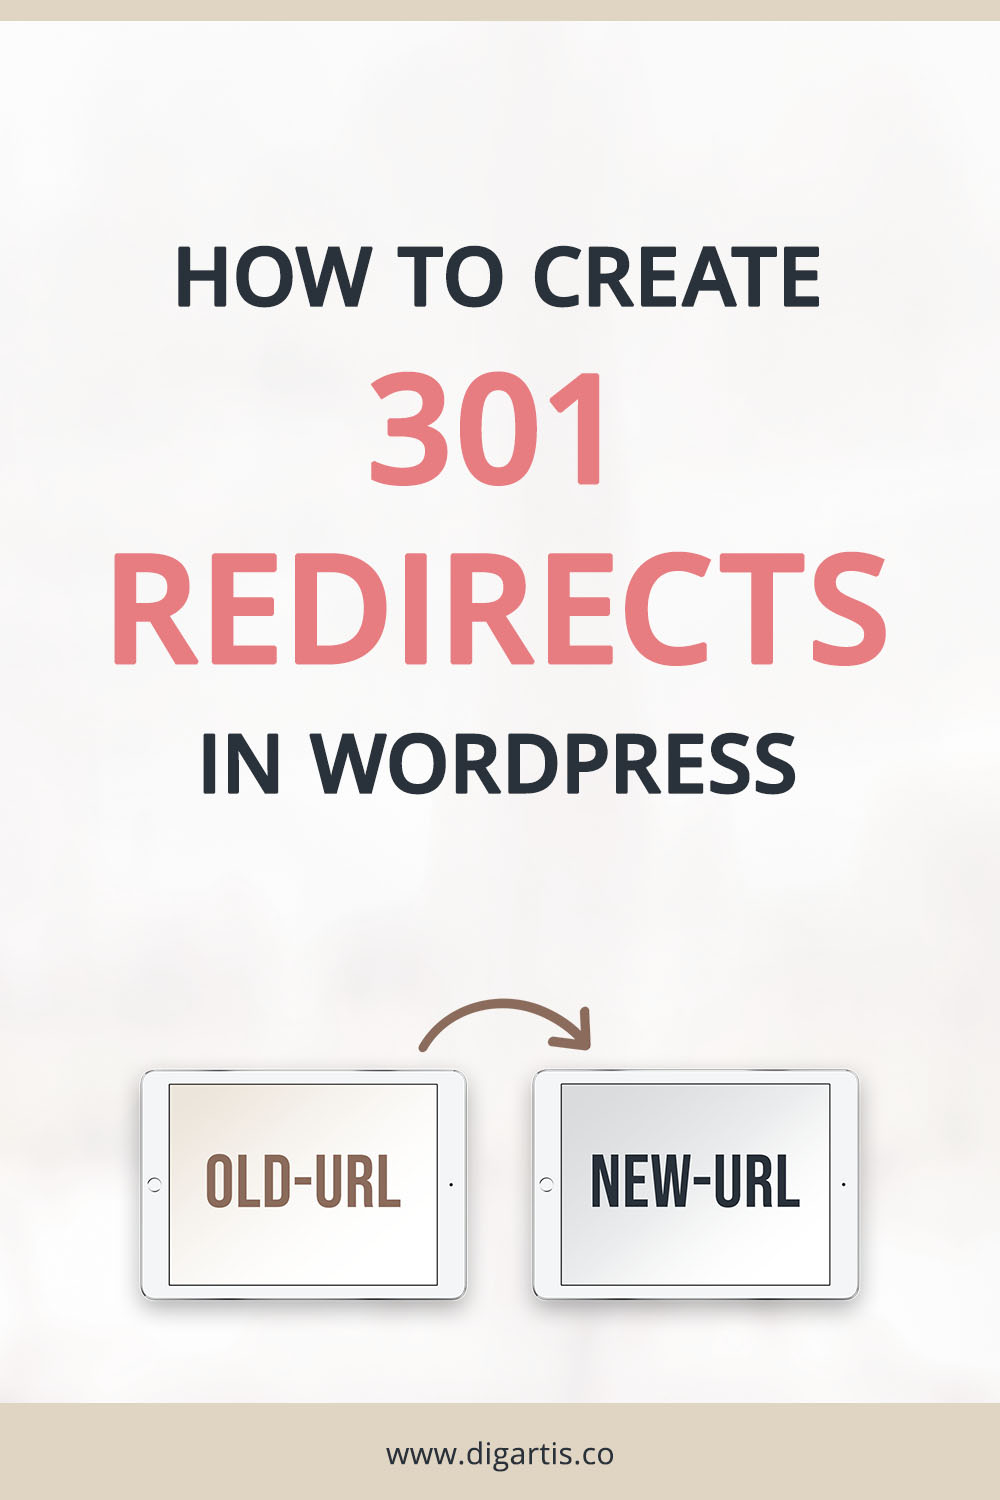 How to create 301 redirects in WordPress